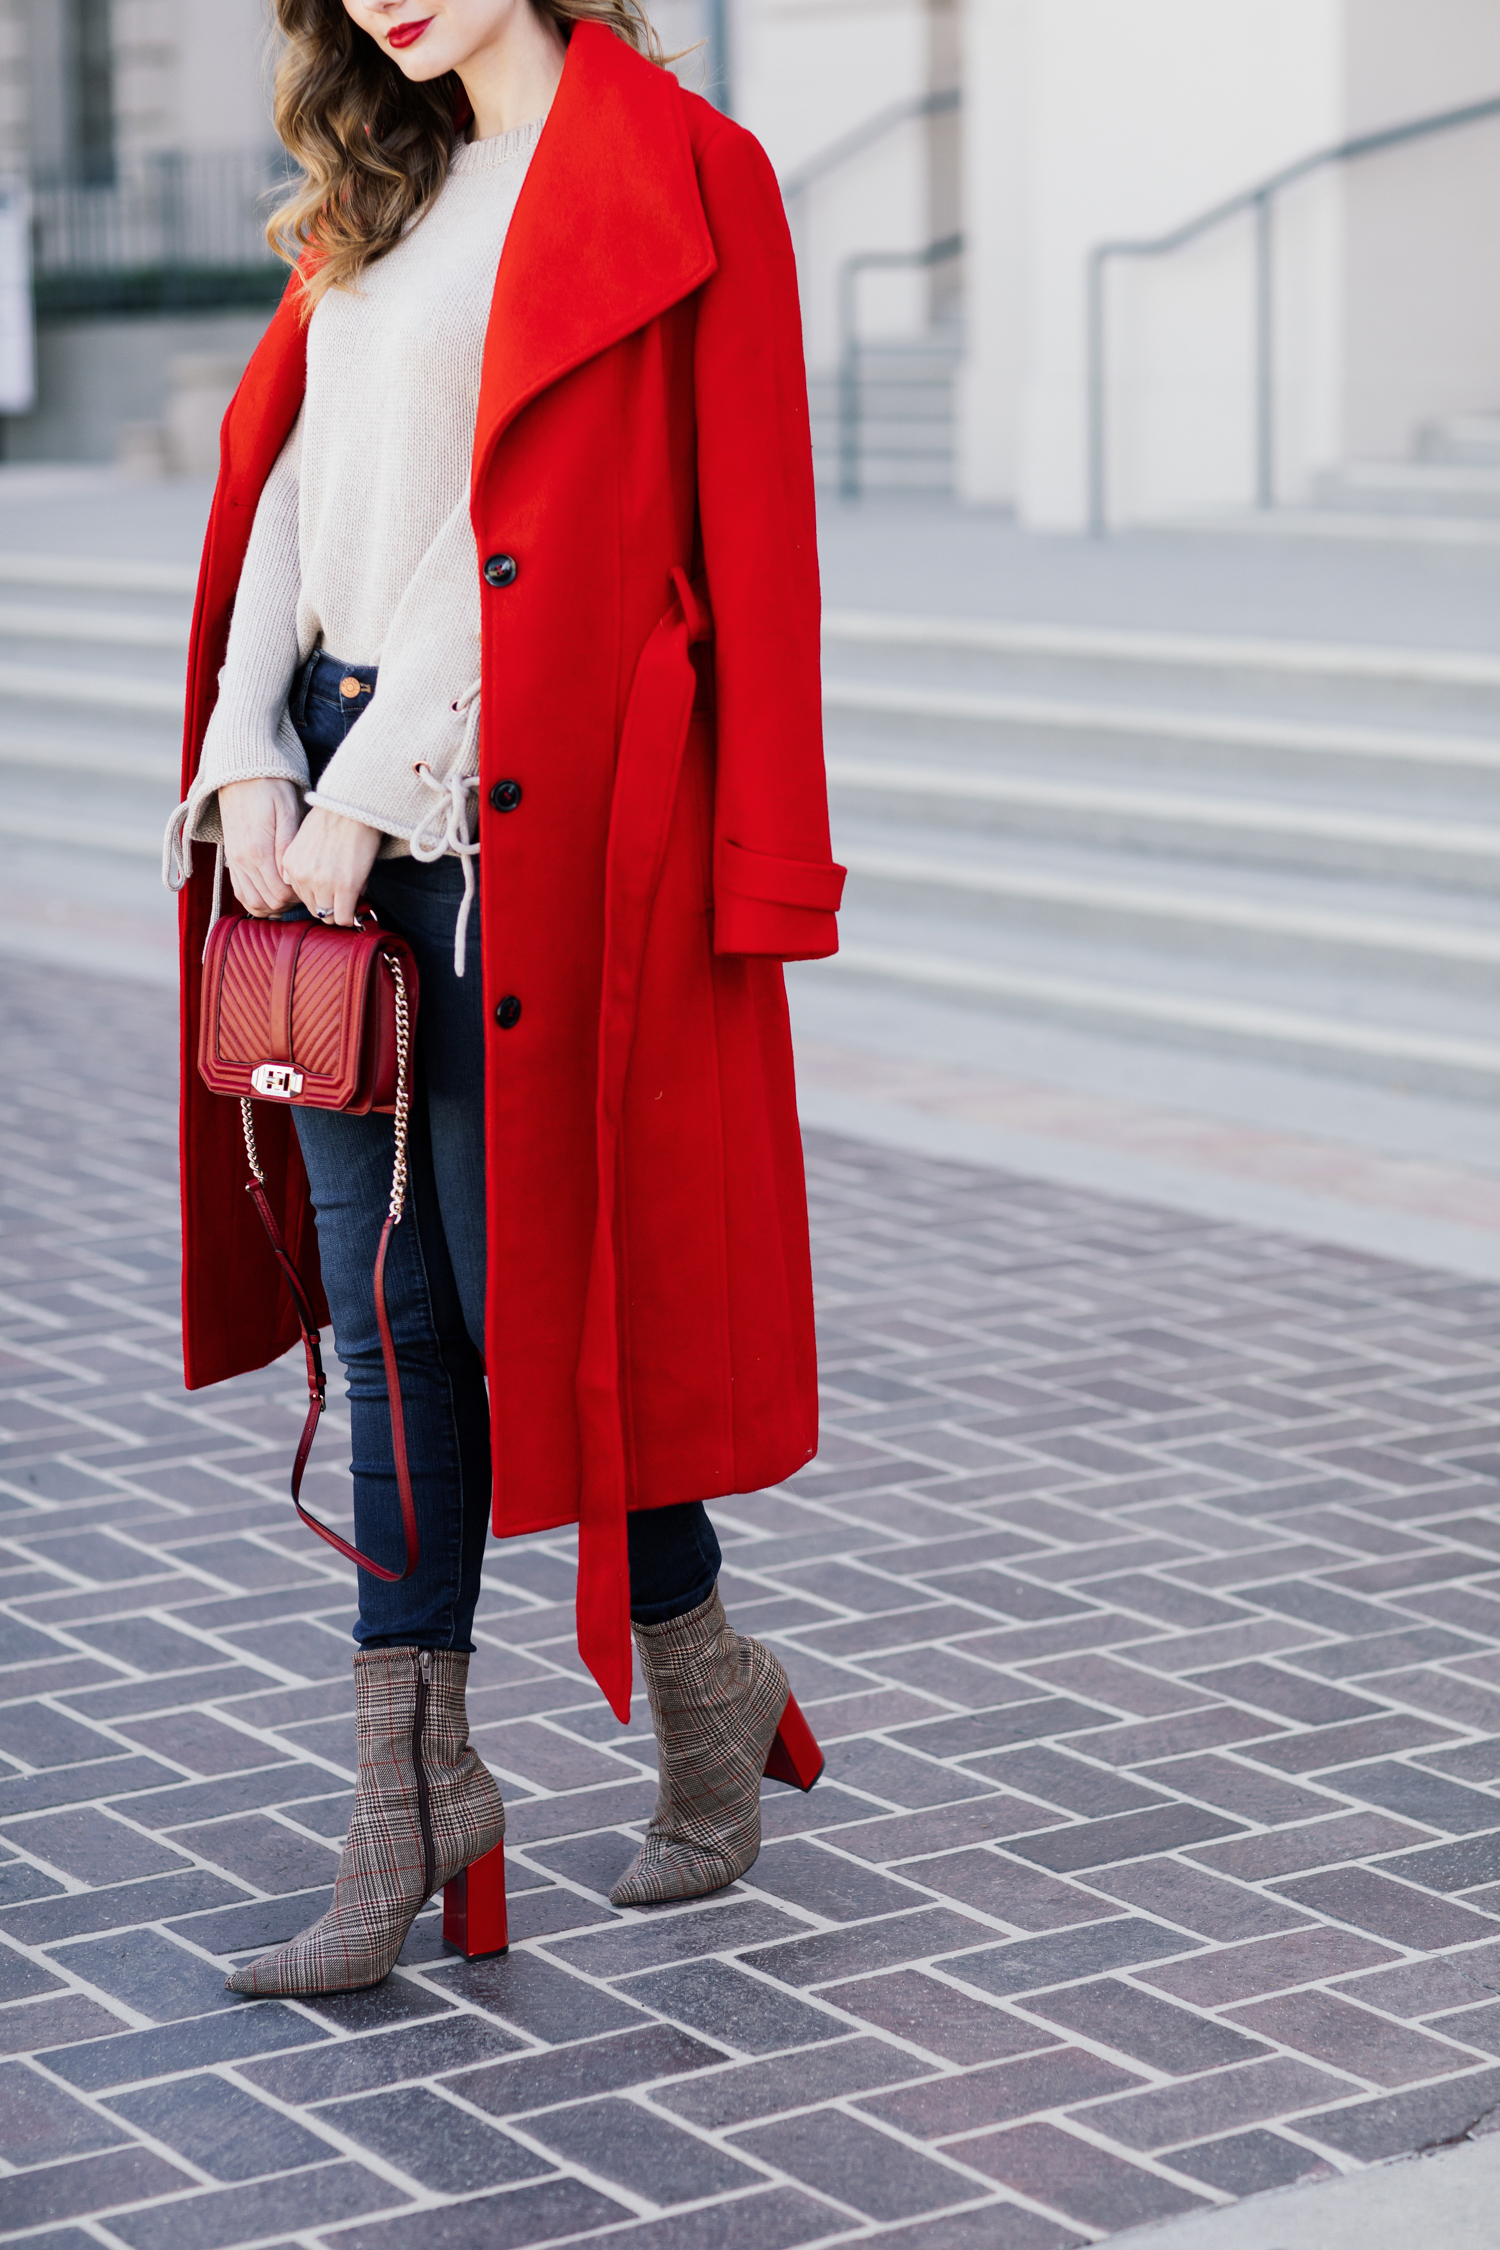 Alyssa Campanella of The A List blog wears Yumi Kim Undercover Red Coat, Jeffrey Campbell Siren boots, and See by Chloe lace up sweater